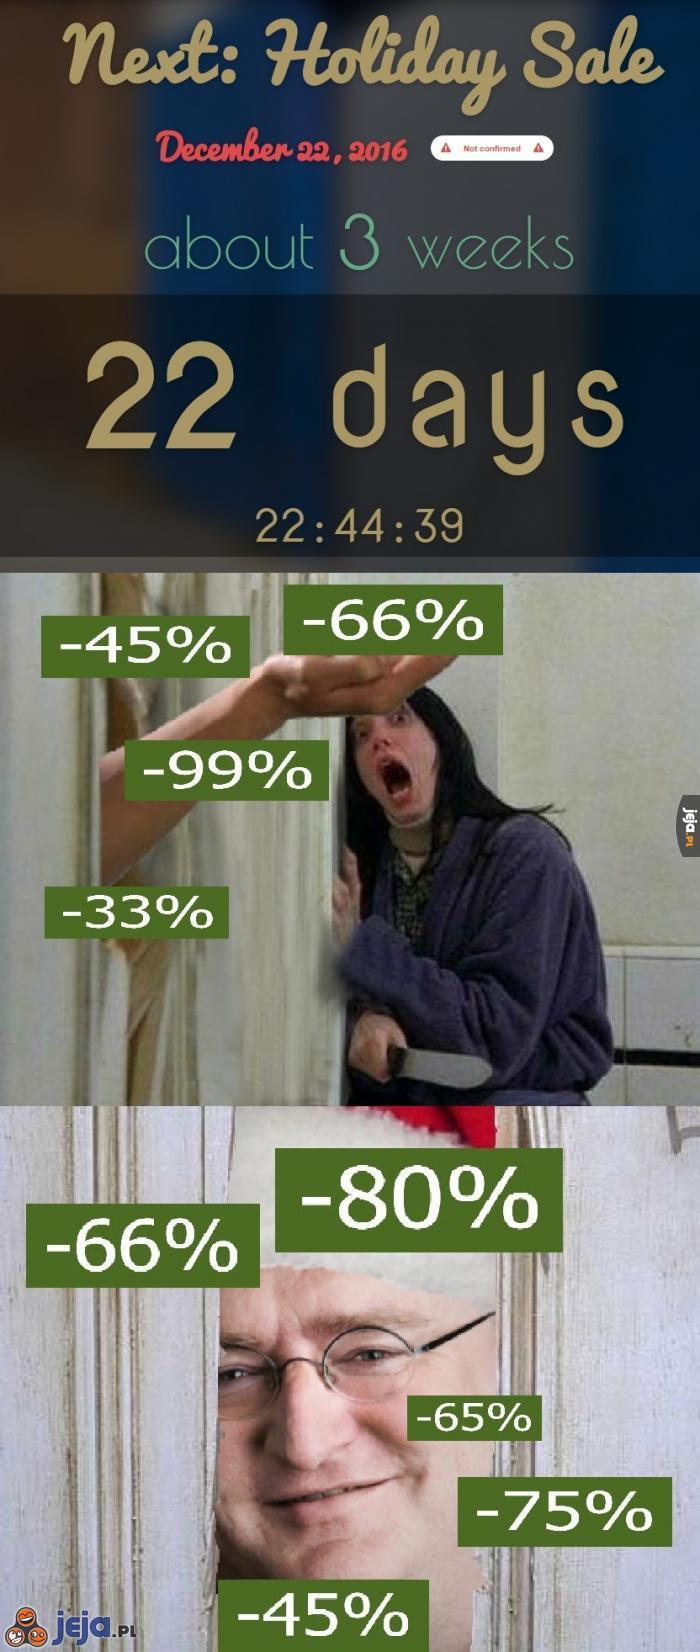 Steam Winter Sale is coming